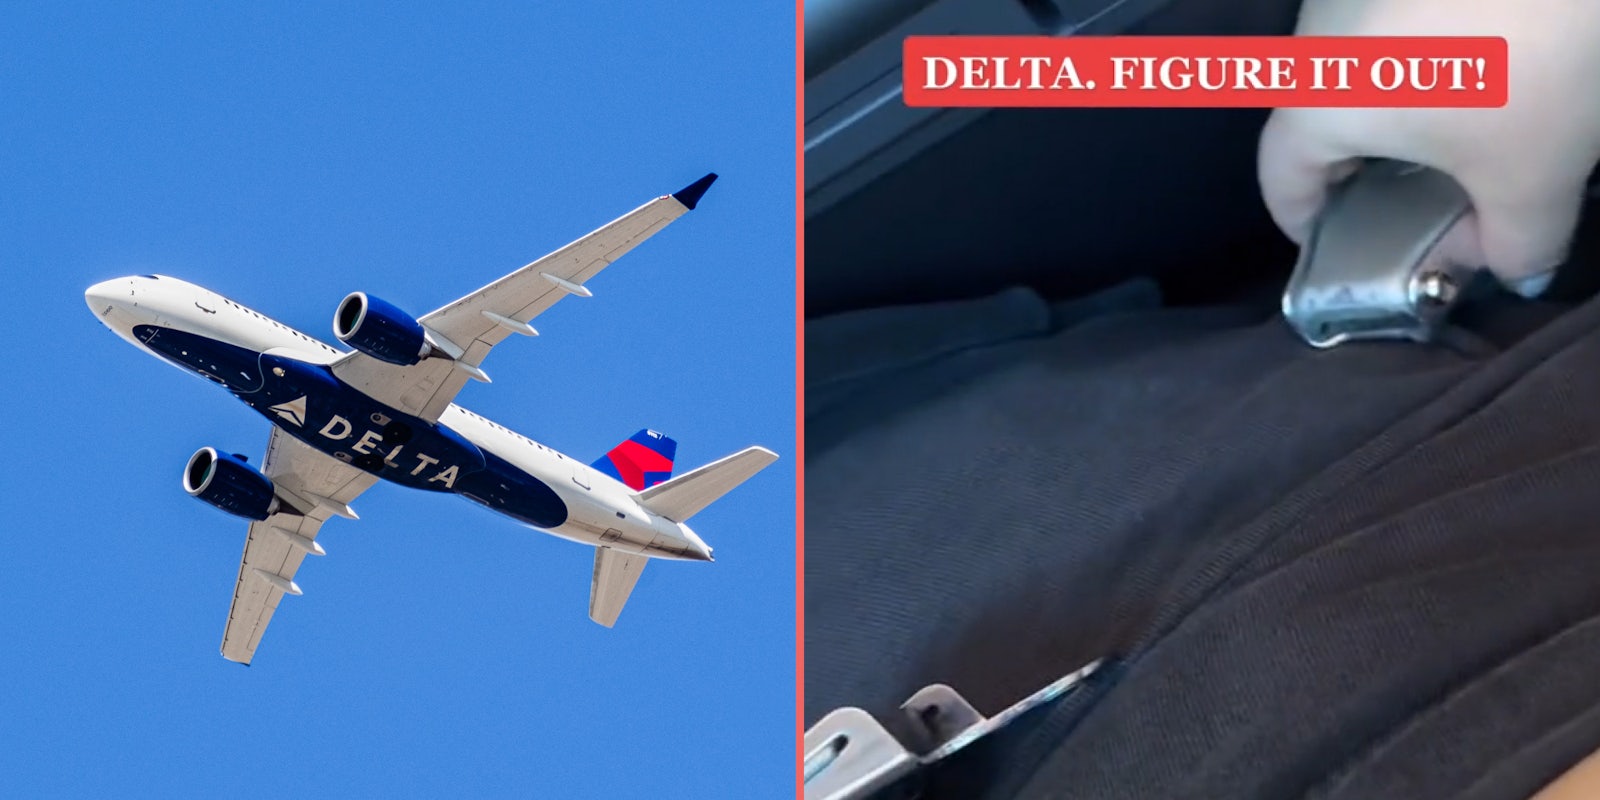 Delta airplane in sky (l) Woman in plane seatbelt does not fit caption 'DELTA. FIGURE IT OUT!' (r)